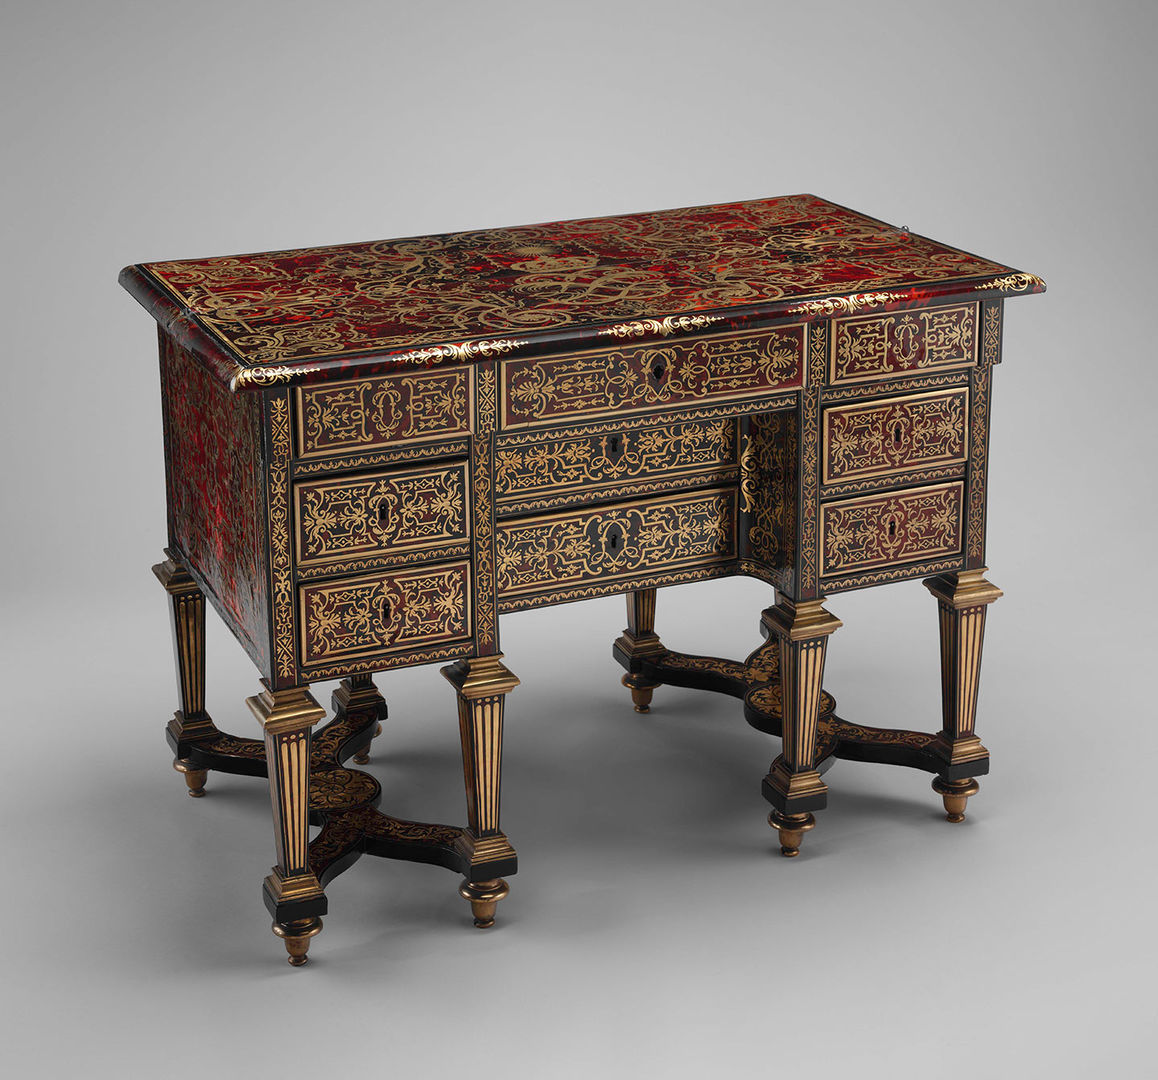 Small desk with folding top (bureau brisé), ca. 1685. Marquetry by Alexandre-Jean Oppenordt (Dutch, 1639–1715, active France); Designed and possibly engraved by Jean Berain (French, 1640–1711). French, Paris. Oak, pine, walnut veneered with ebony, rosewood, and marquetry of tortoiseshell and engraved brass; gilt bronze and steel; 30 5/16 x 41 3/4 x 23 3/8 in. (77 x 106 x 59.4cm). The Metropolitan Museum of Art, New York, Gift of Mrs. Charles Wrightsman, 1986 (1986.365.3)